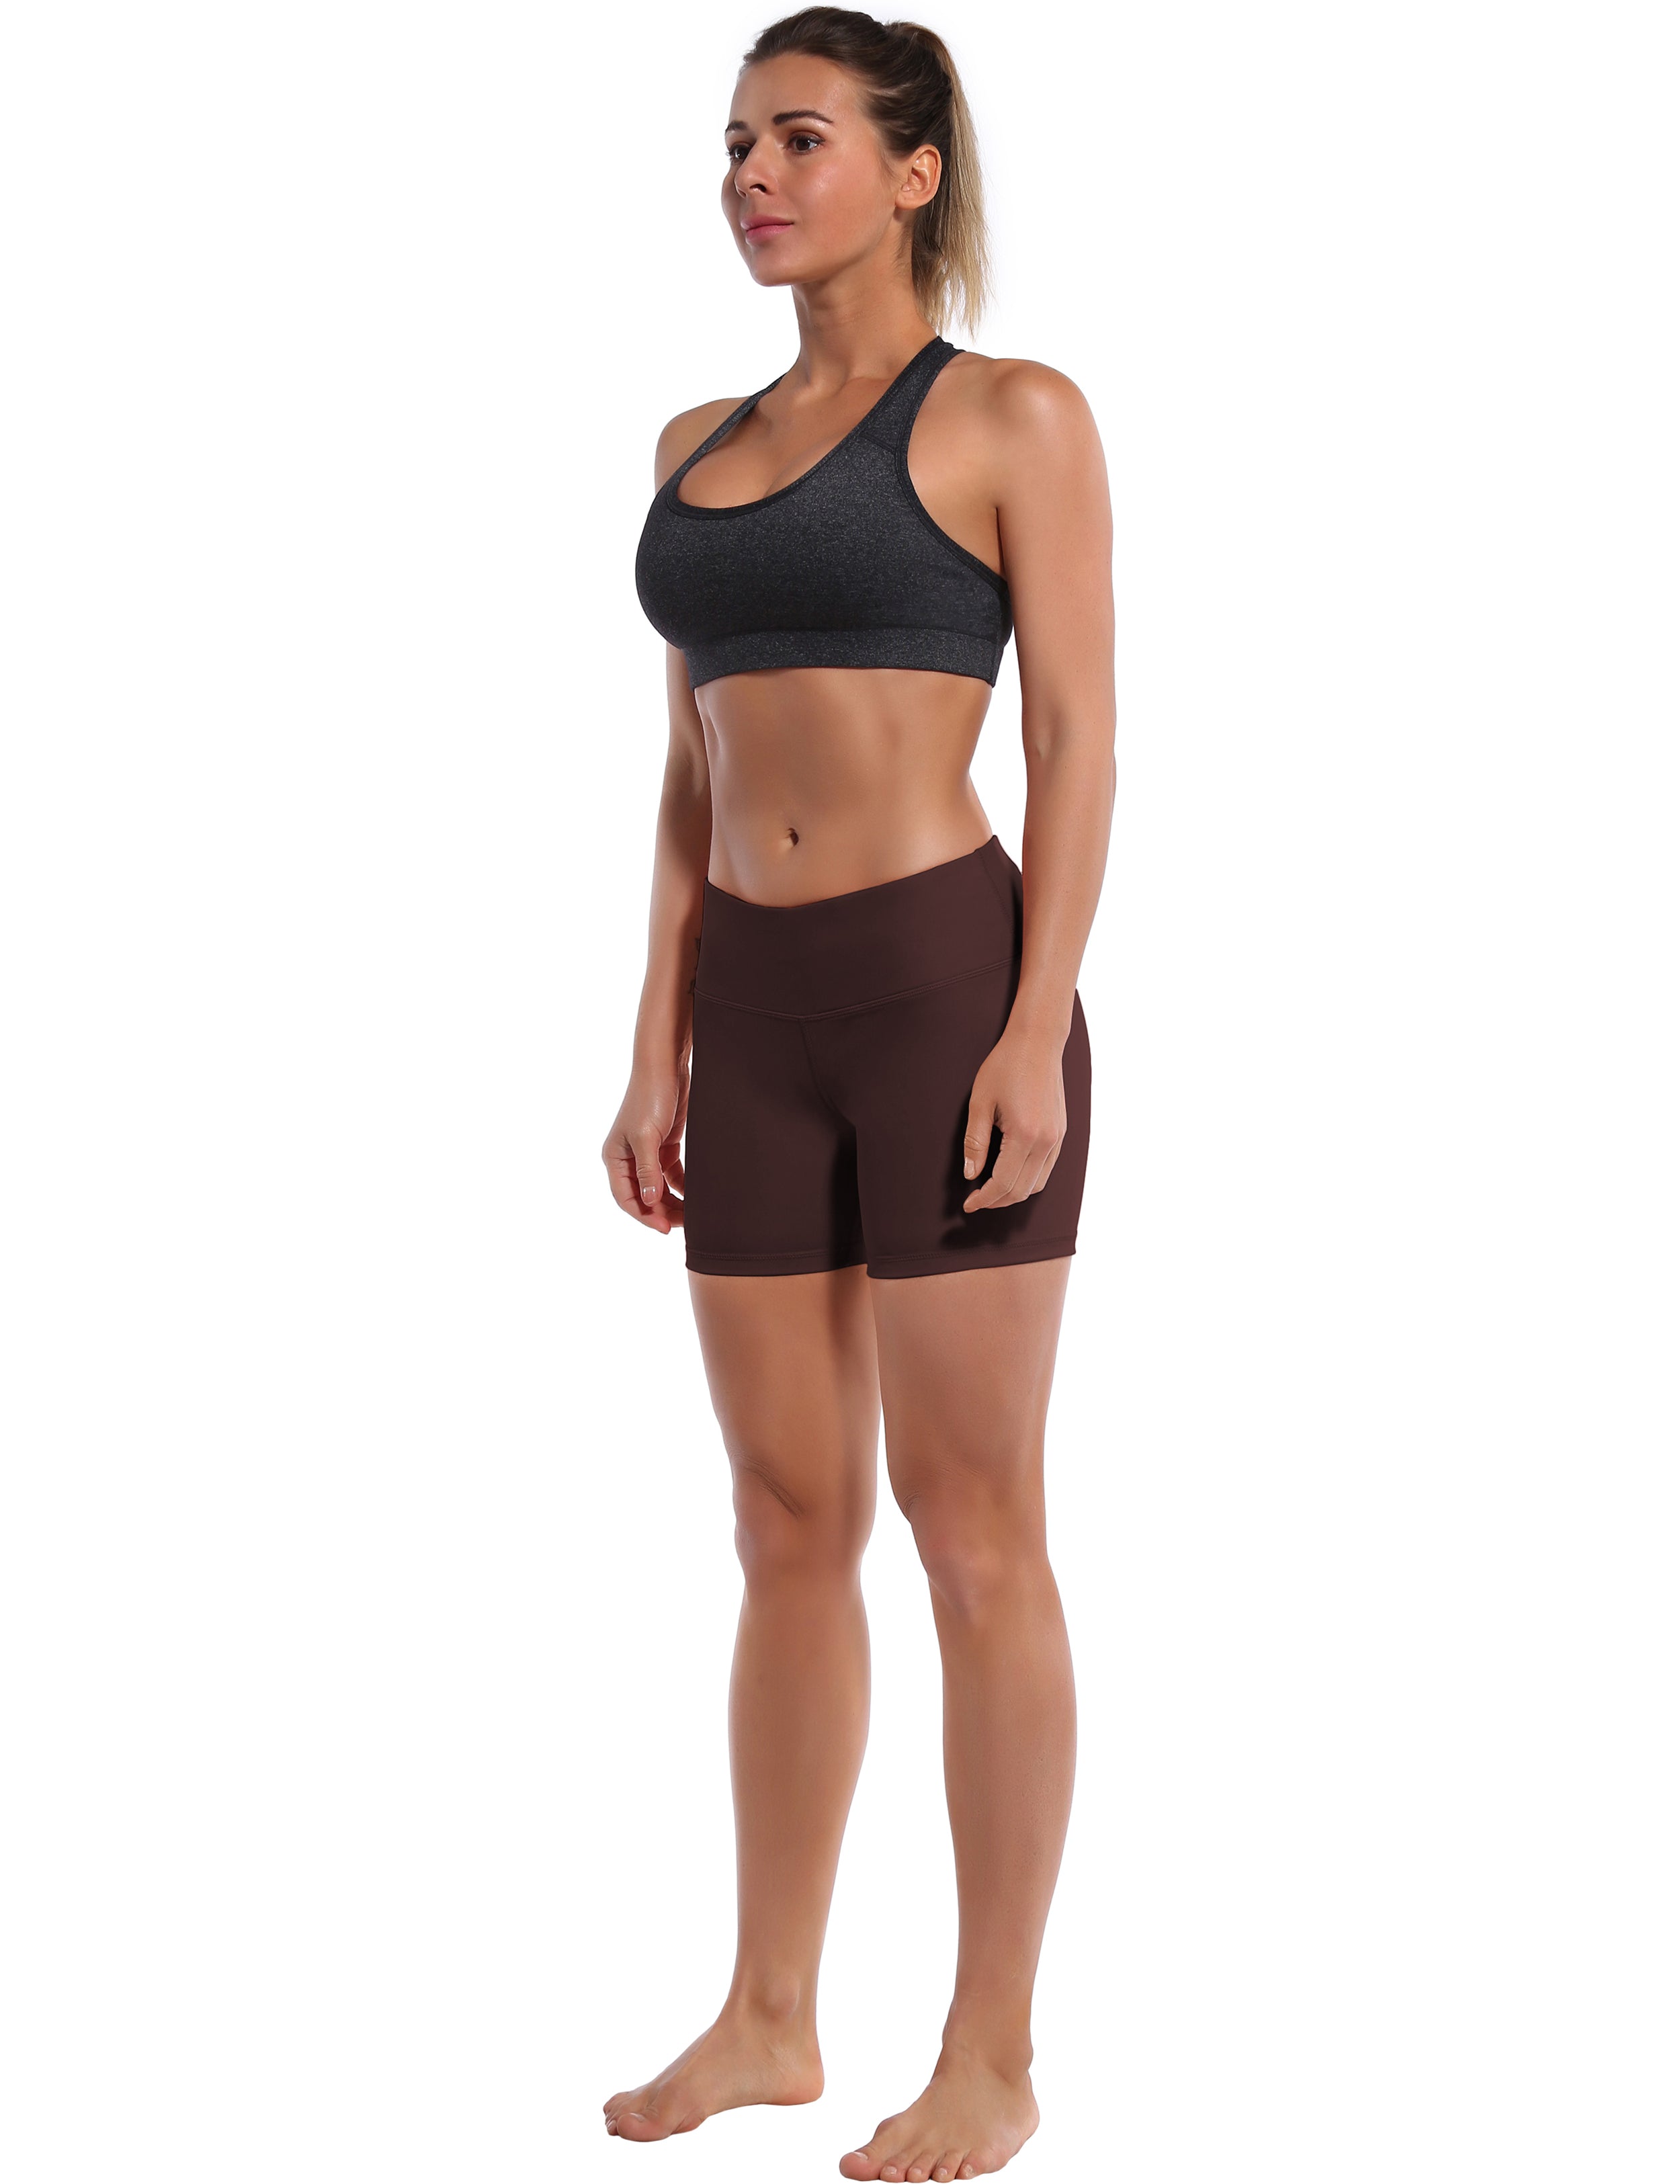 4" Pilates Shorts mahoganymaroon Sleek, soft, smooth and totally comfortable: our newest style is here. Softest-ever fabric High elasticity High density 4-way stretch Fabric doesn't attract lint easily No see-through Moisture-wicking Machine wash 75% Nylon, 25% Spandex